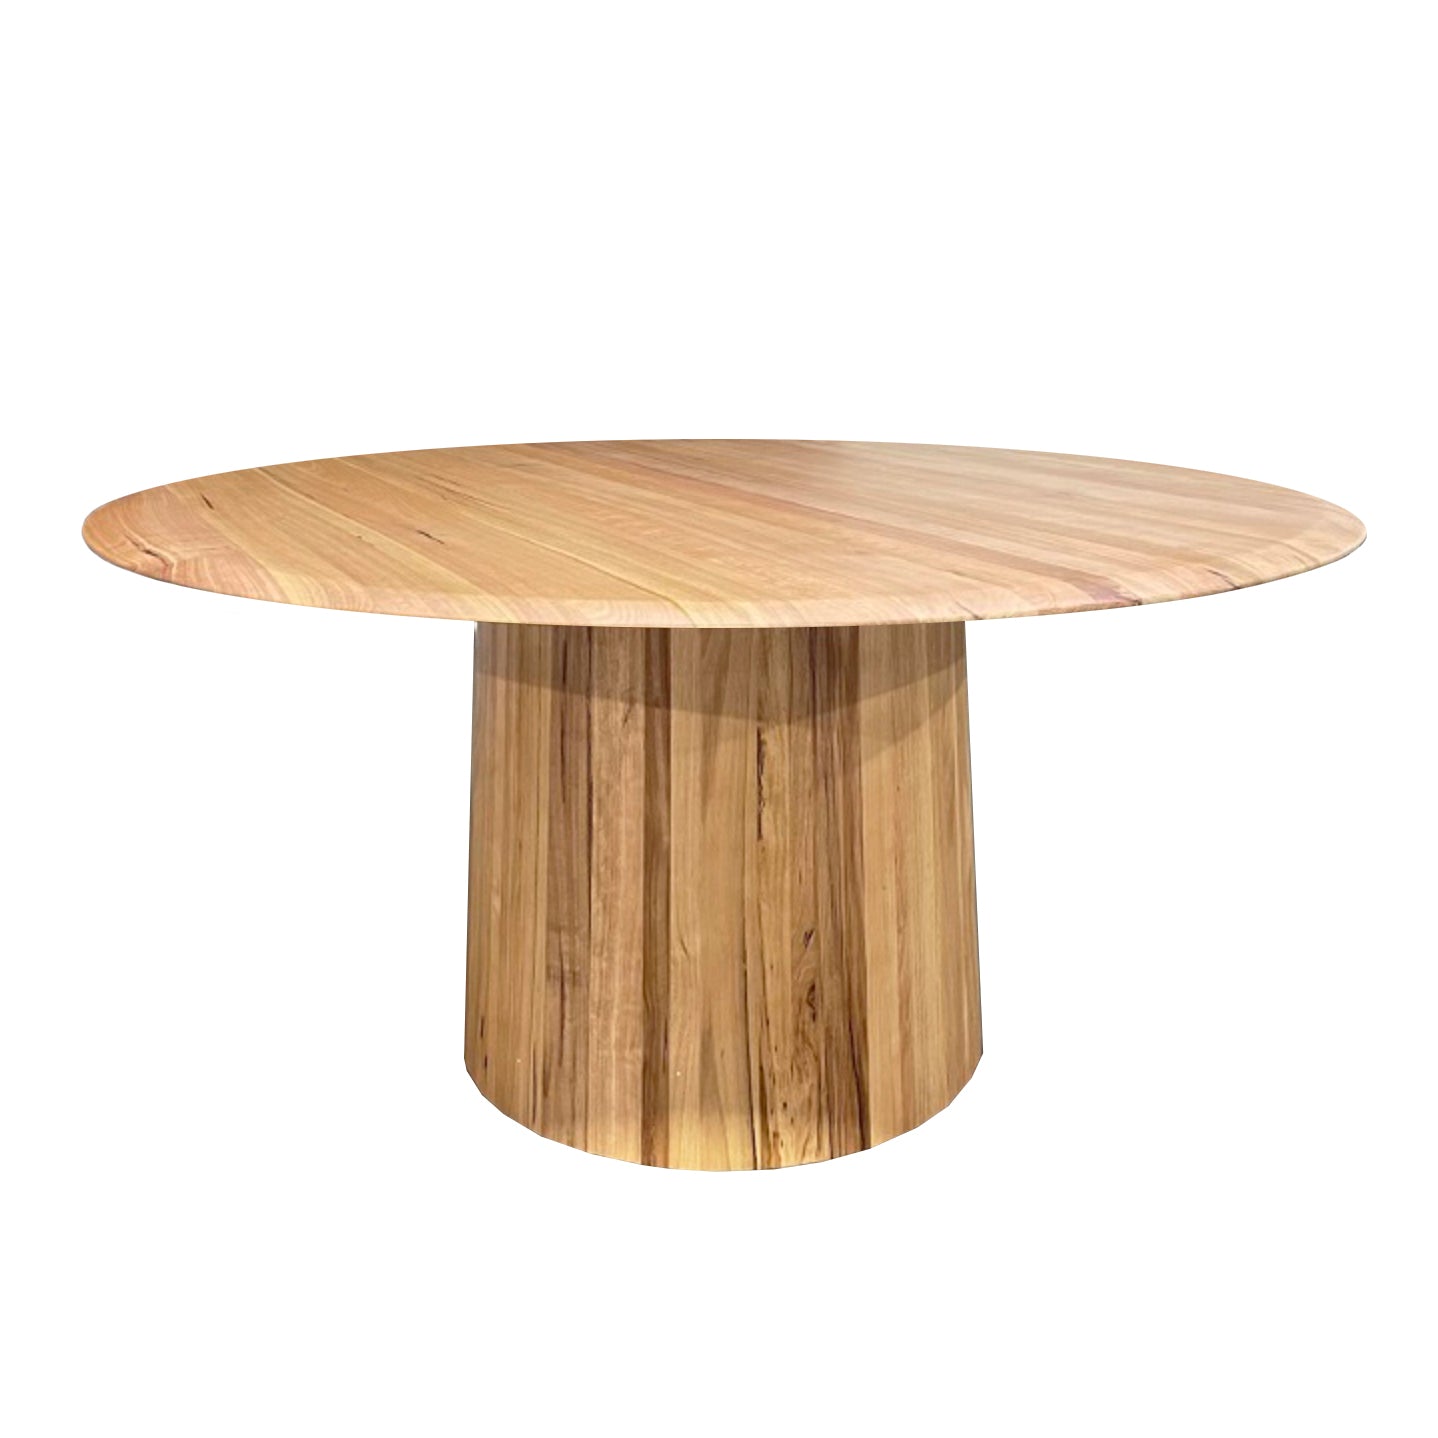 PITTSBURGH ROUND DINING TABLE